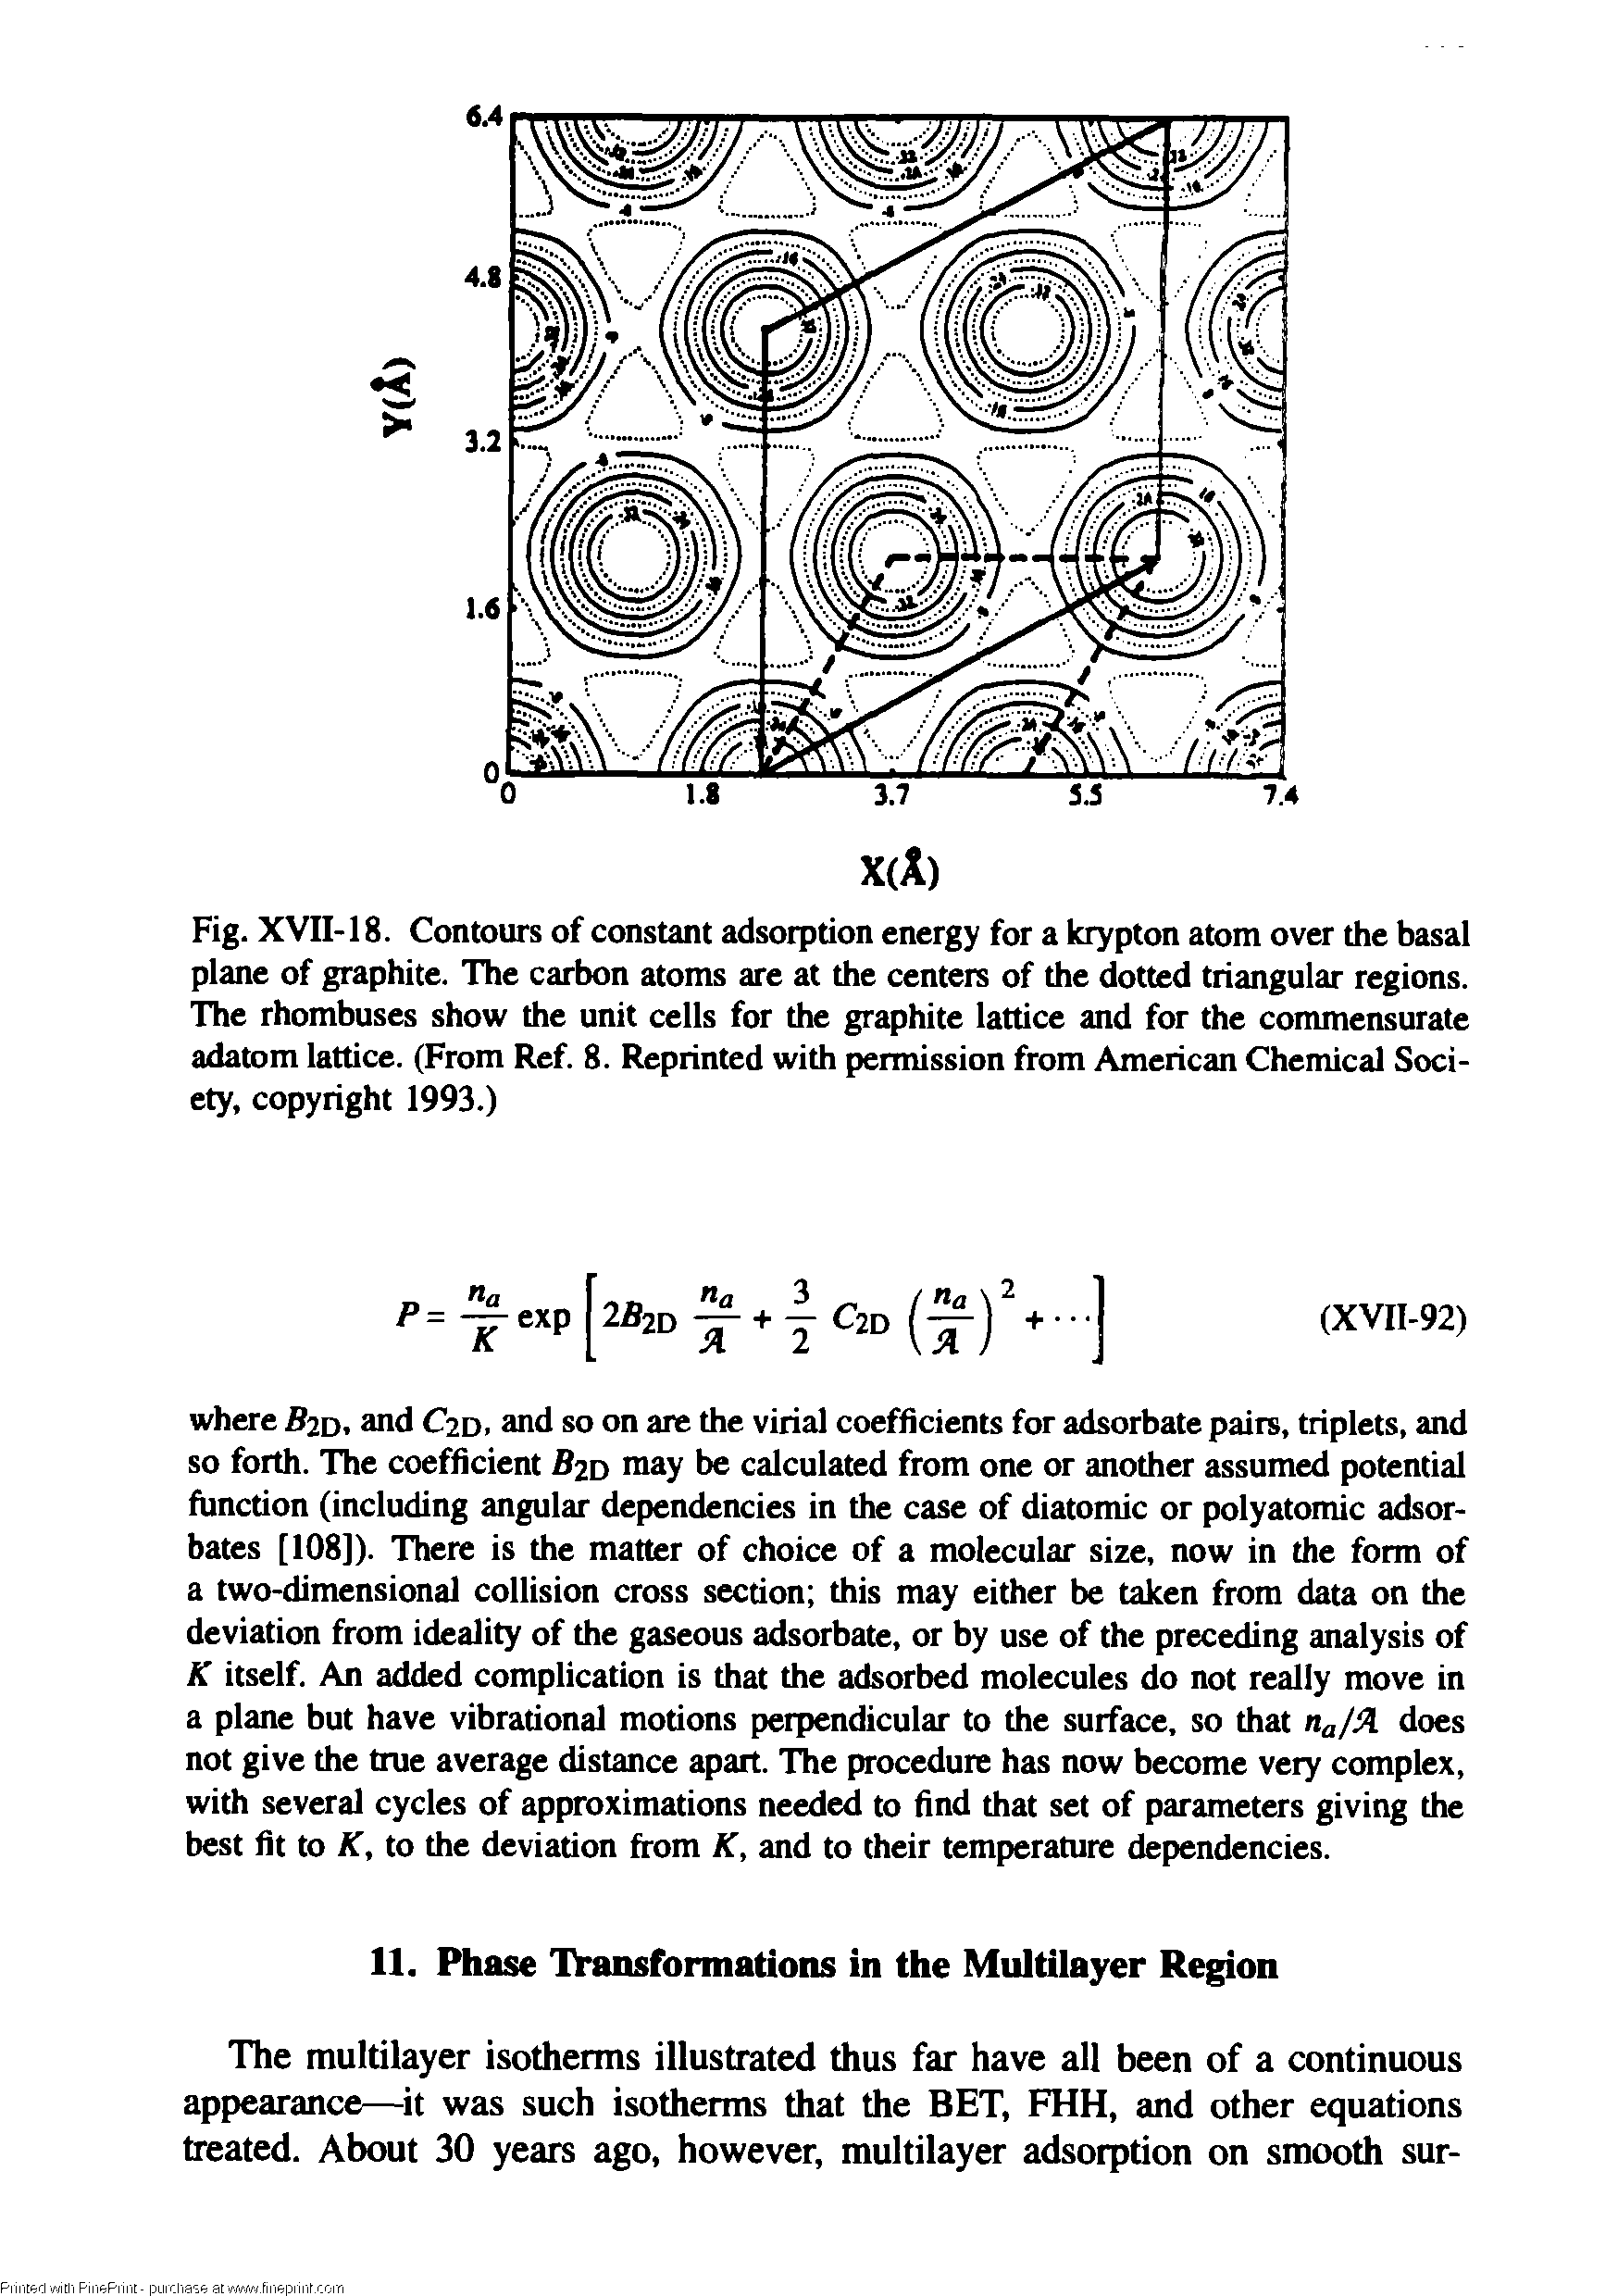 Fig. XVII-18. Contours of constant adsorption energy for a krypton atom over the basal plane of graphite. The carbon atoms are at the centers of the dotted triangular regions. The rhombuses show the unit cells for the graphite lattice and for the commensurate adatom lattice. (From Ref. 8. Reprinted with permission from American Chemical Society, copyright 1993.)...